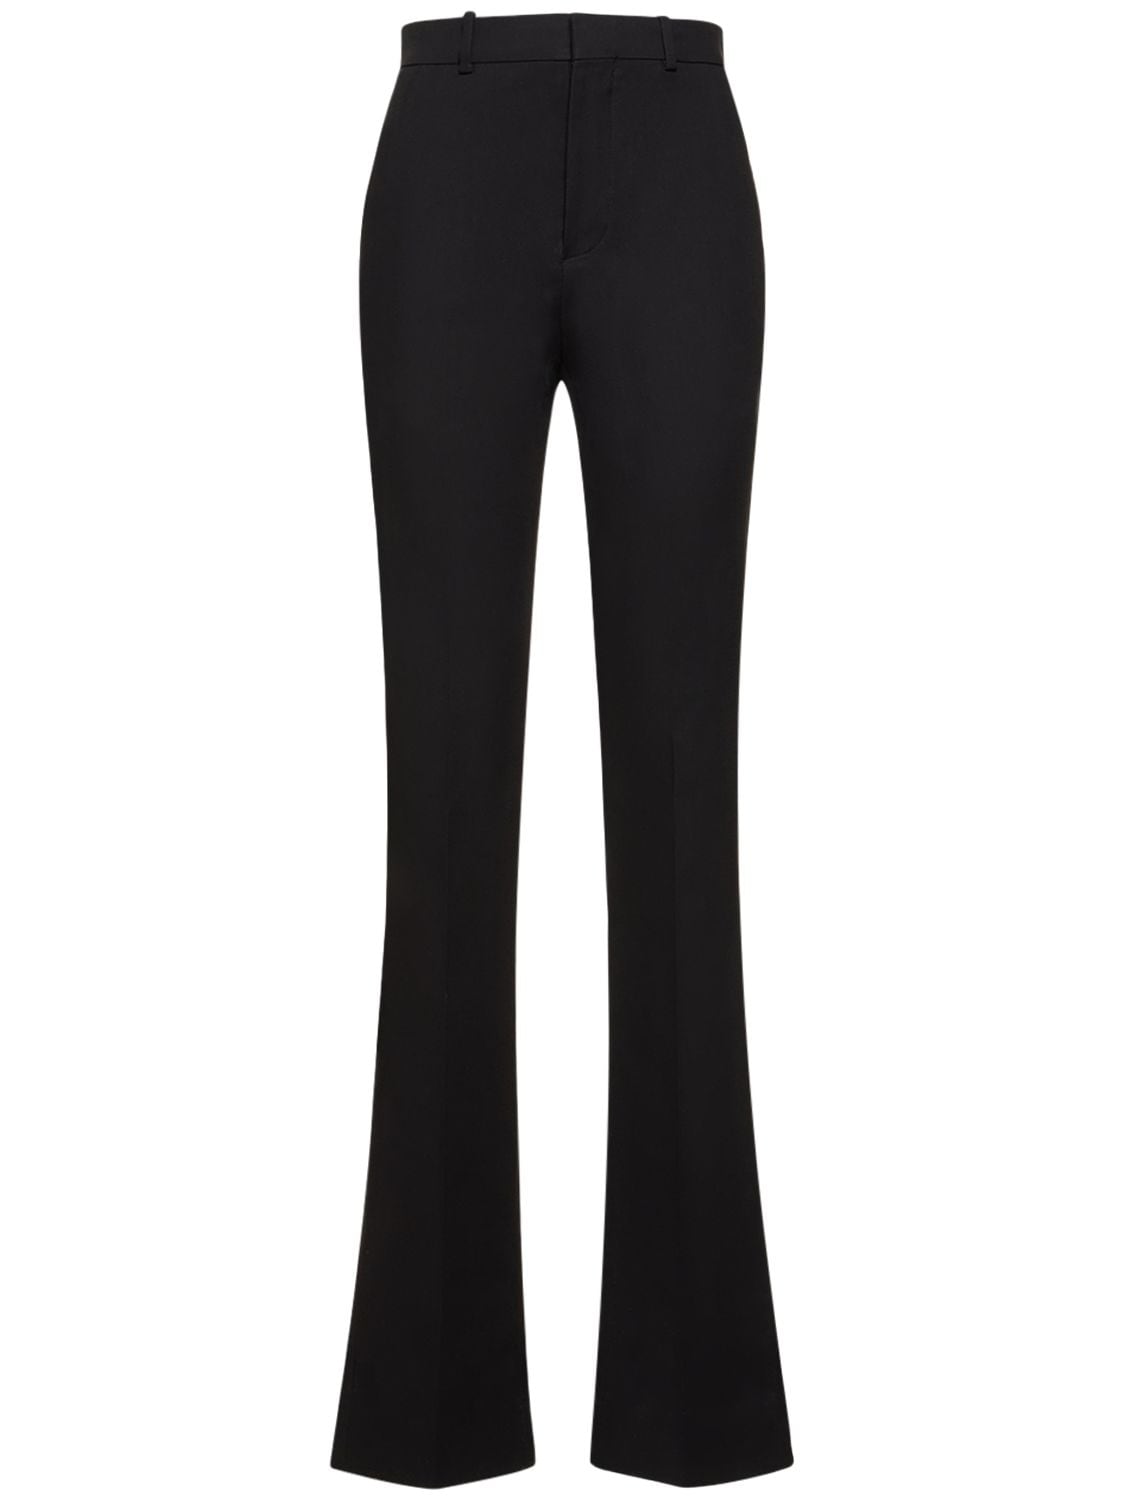 Image of Laurence Fitted Stretch Cotton Pants